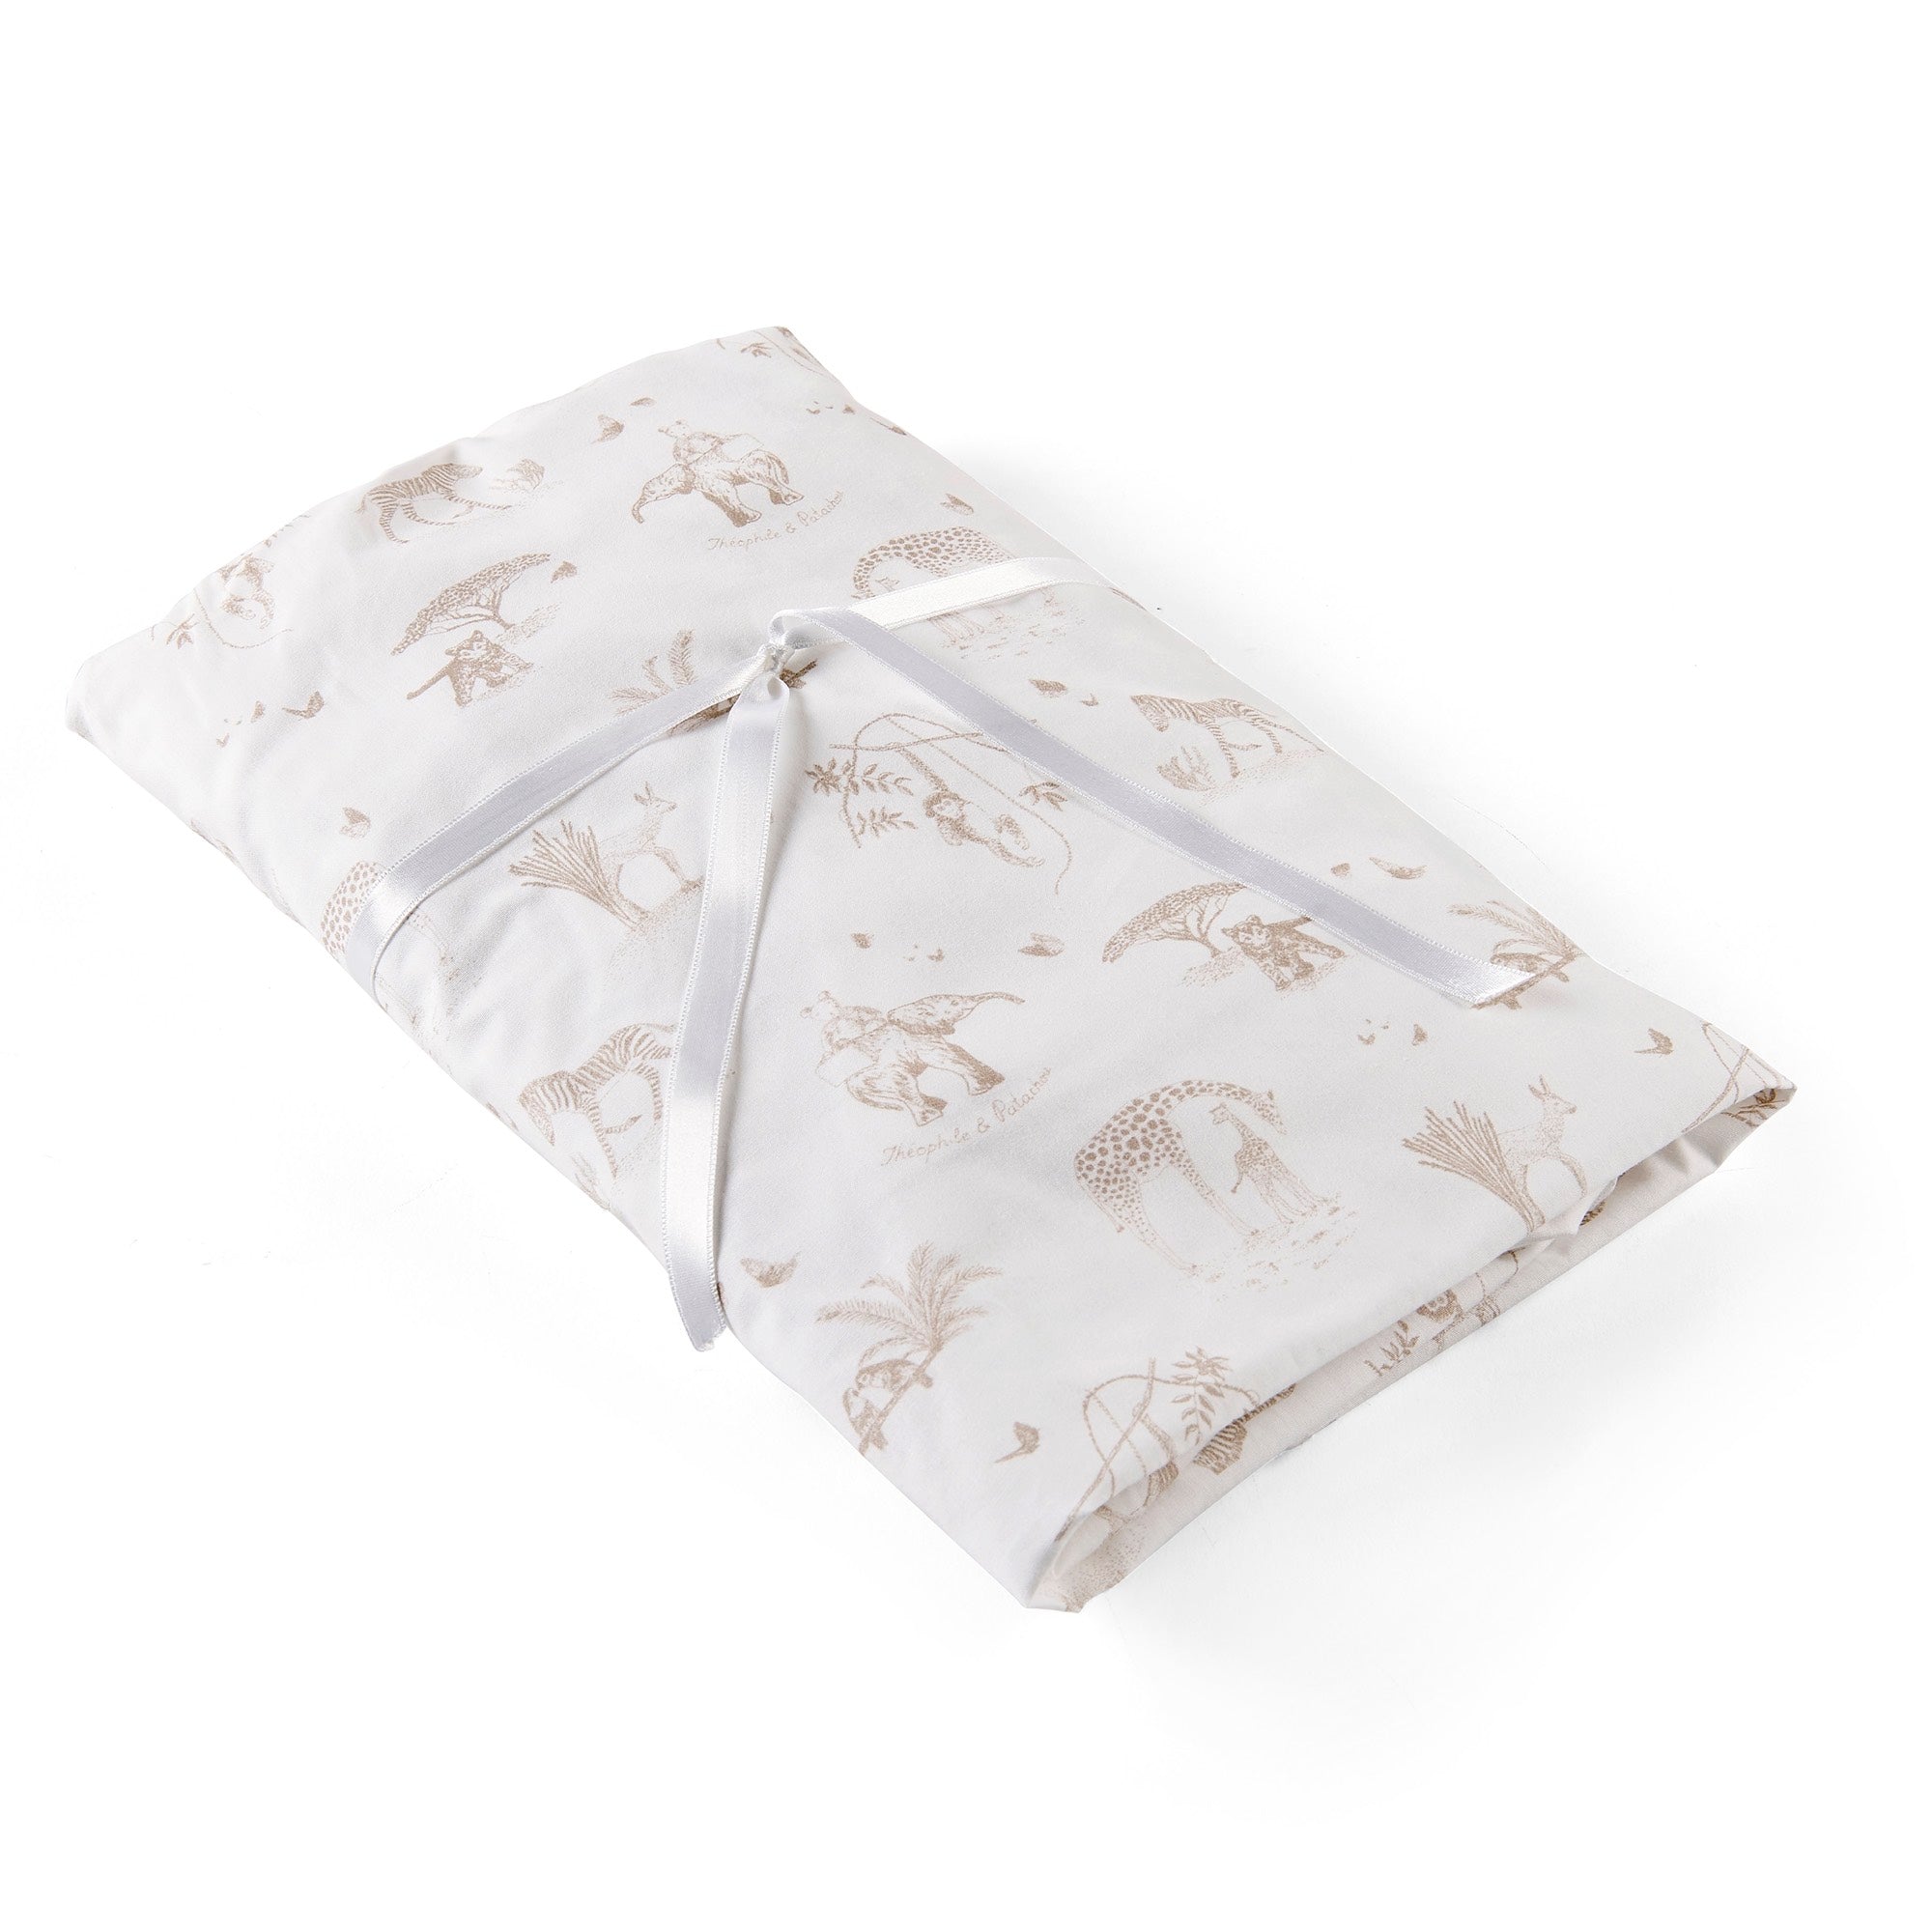 Theophile & Patachou Cot Bed Fitted Sheet 70x140cm - Safari